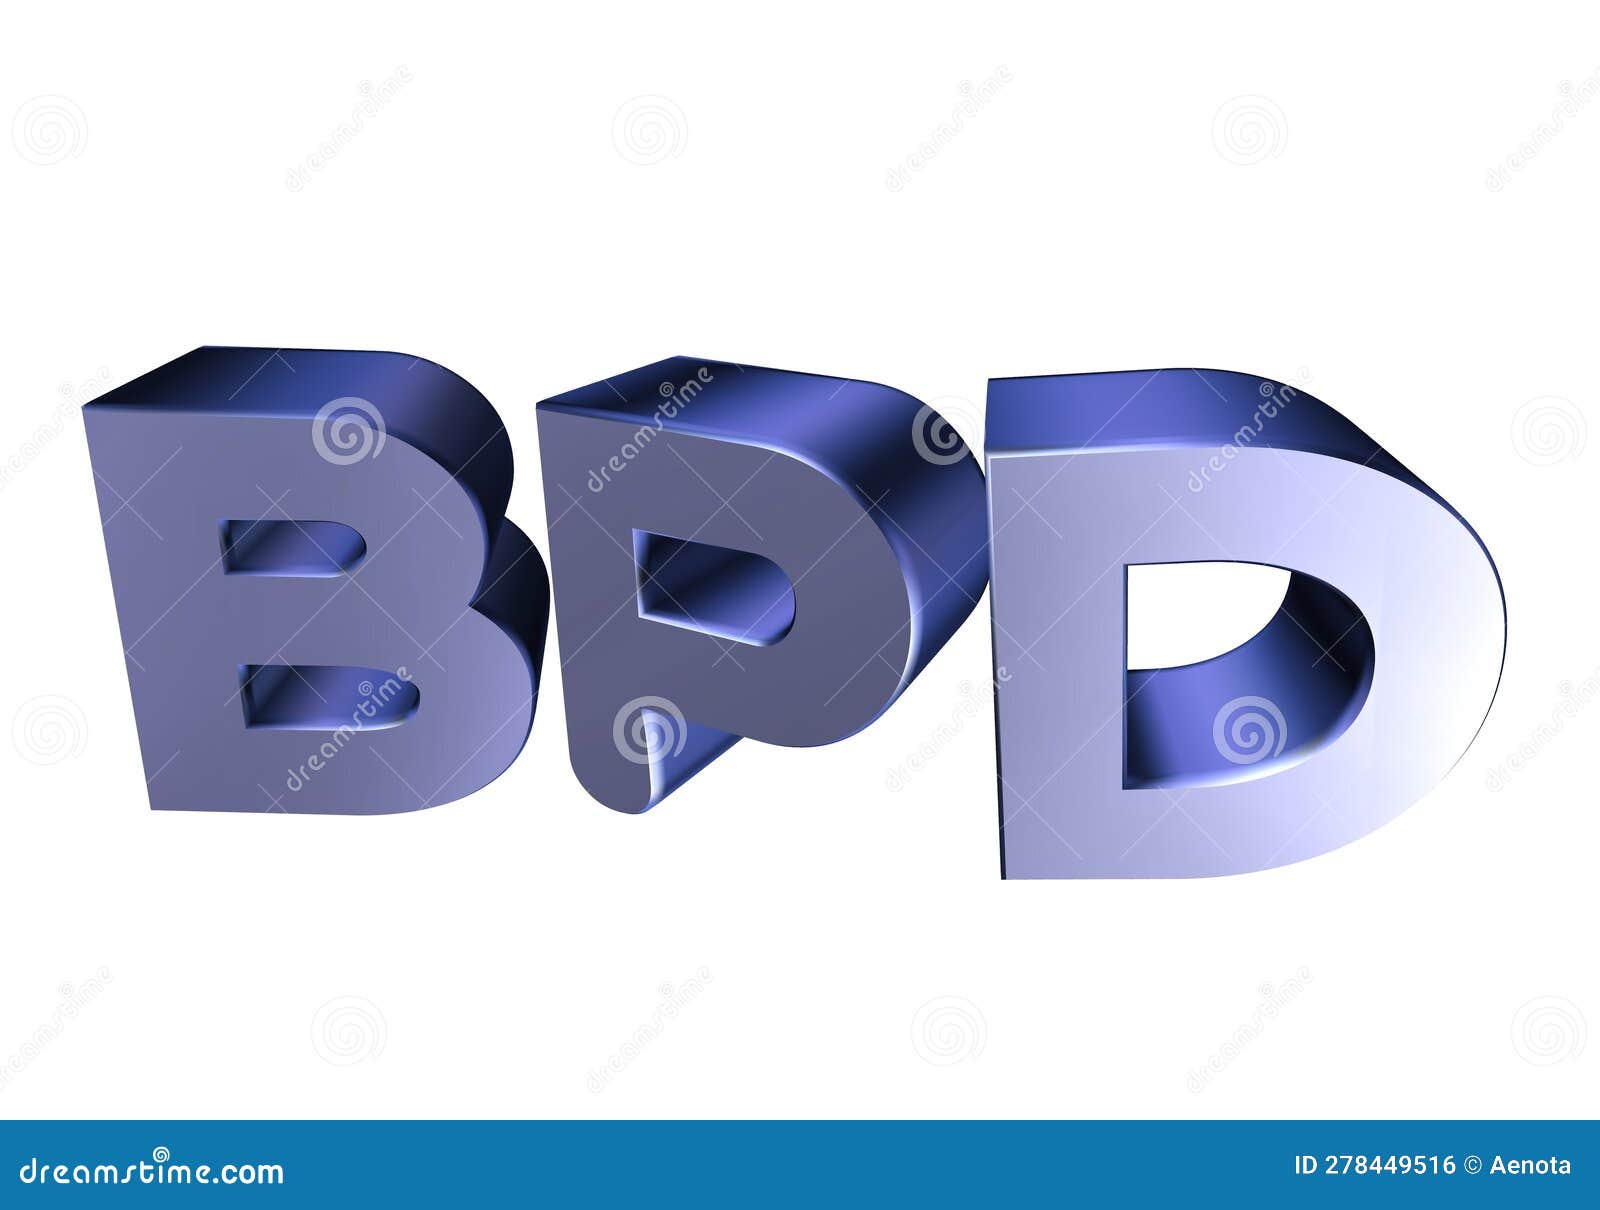 3d rendering metal bpd abbreviation borderline personality disorder concept icon   on white background